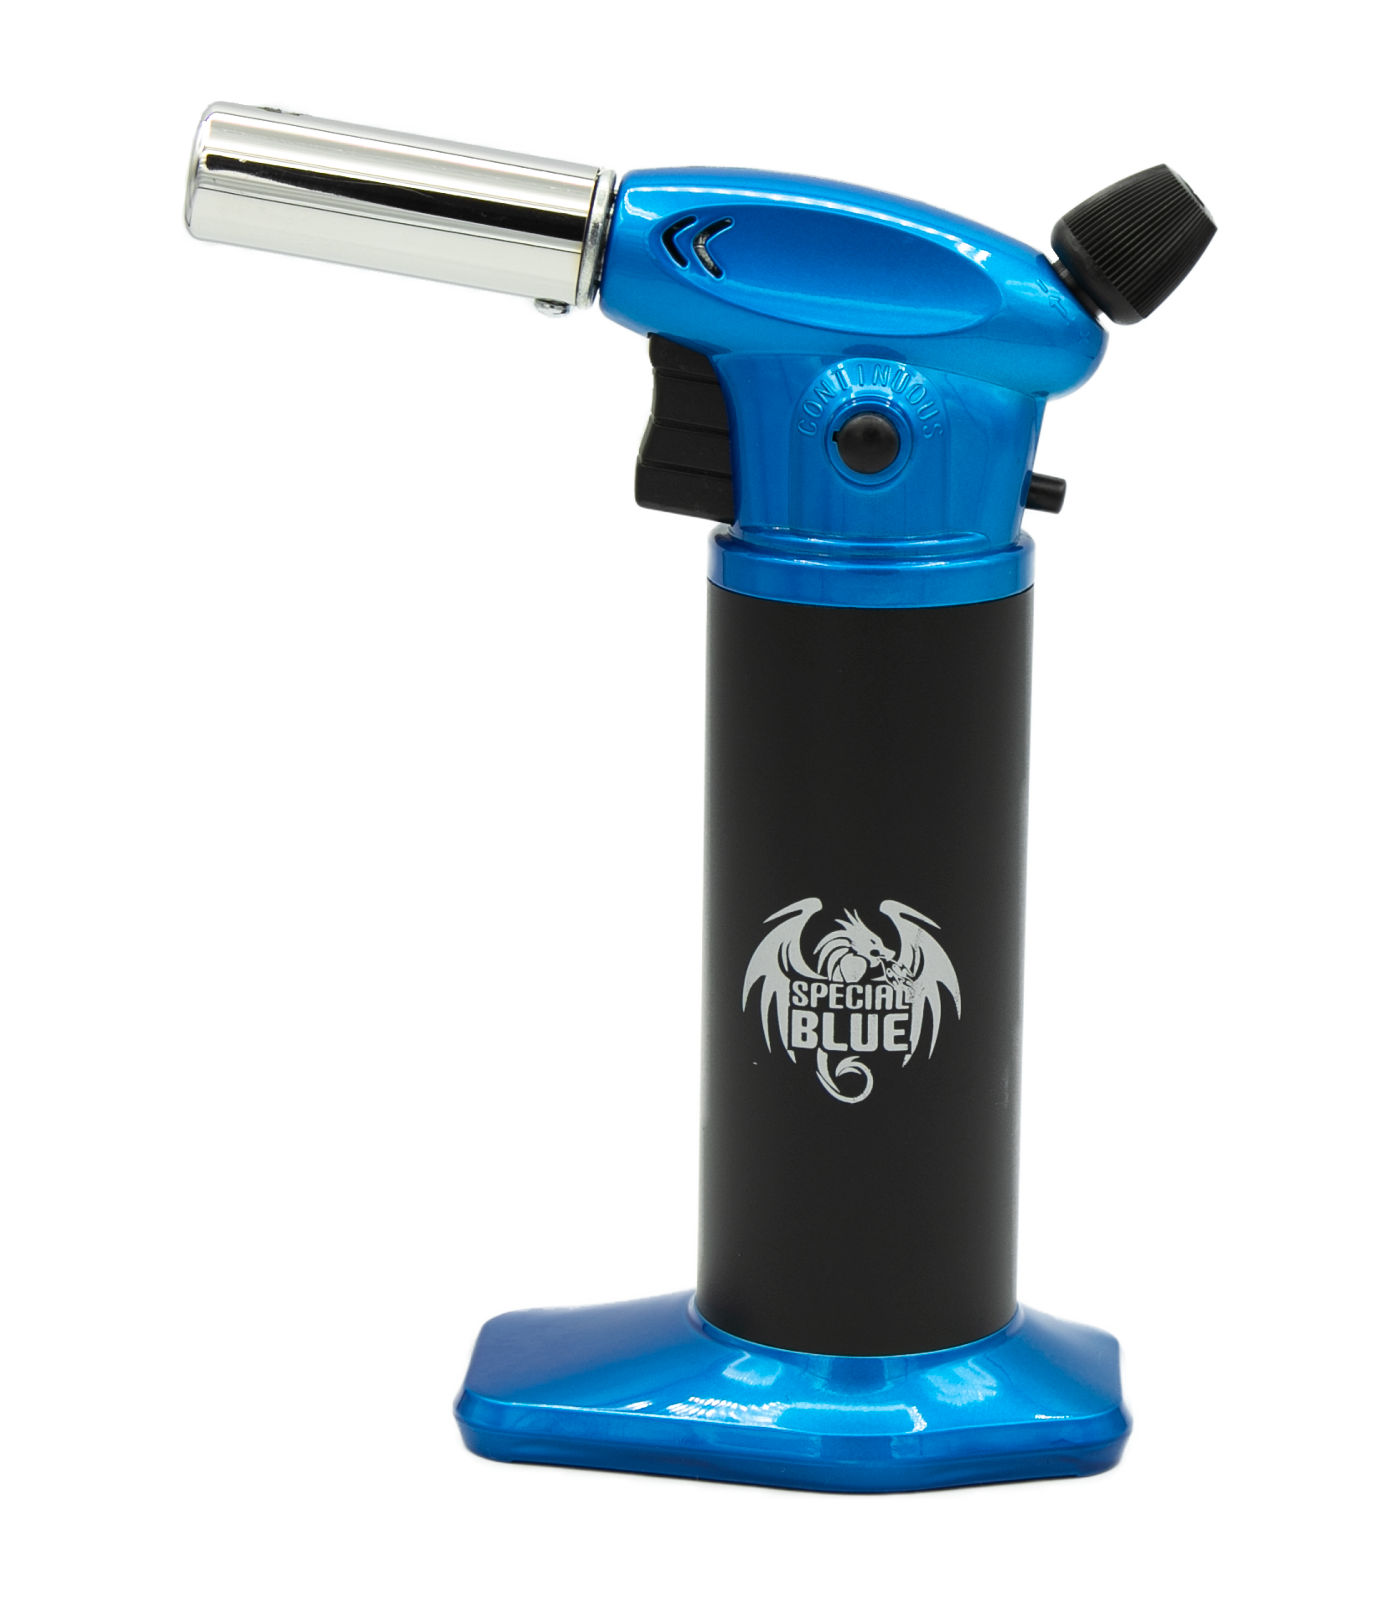 Special Blue Toro Torch